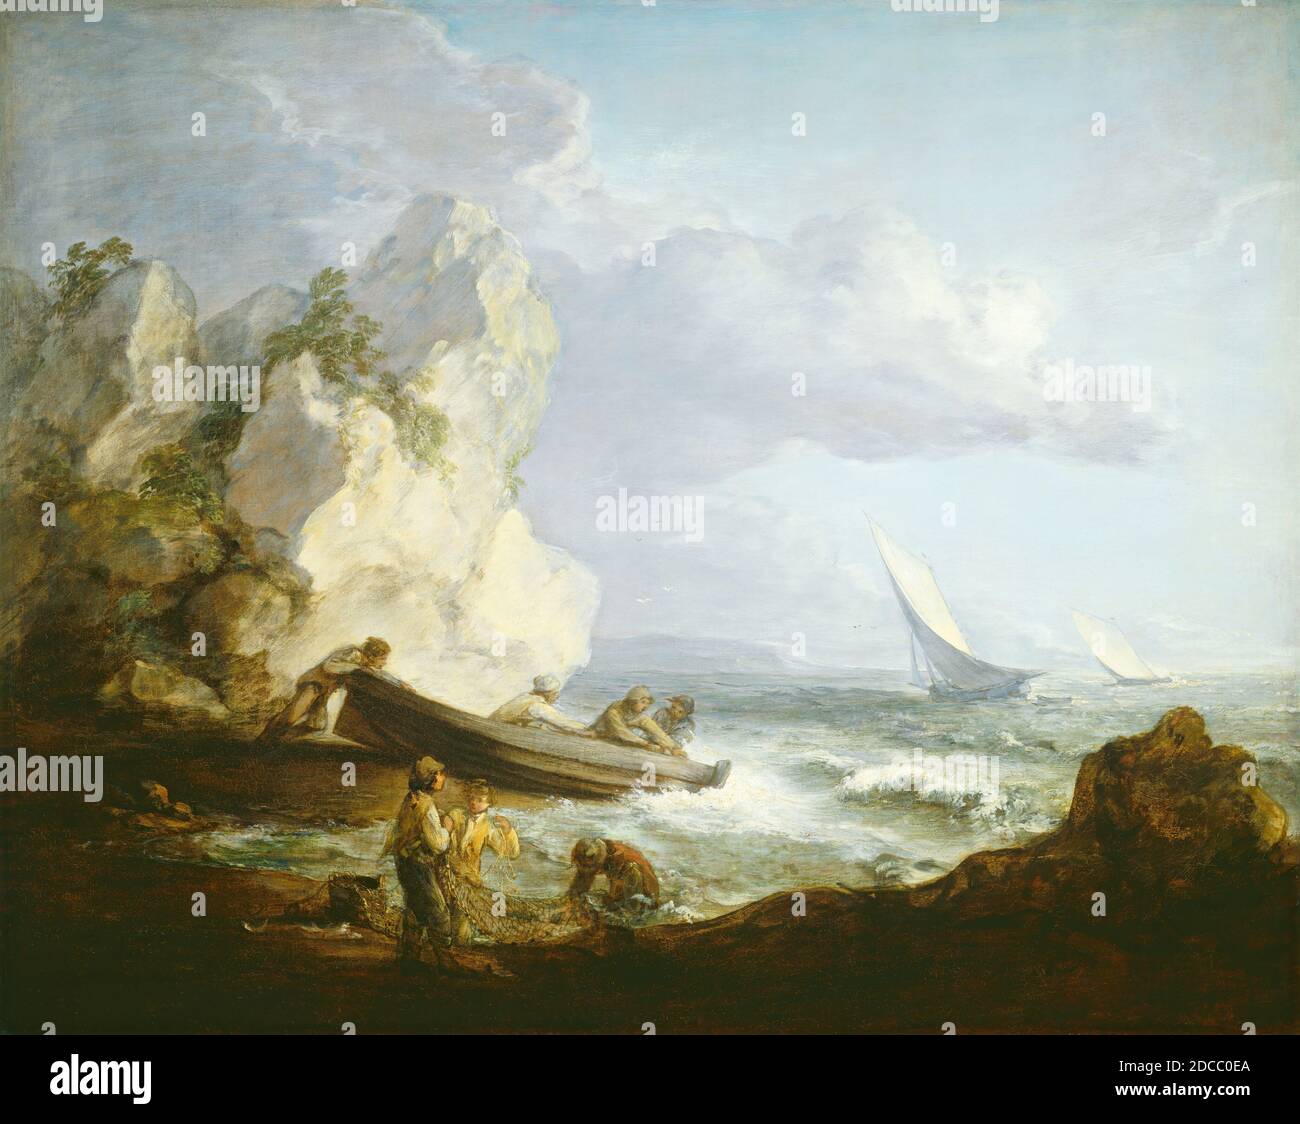 Thomas Gainsborough, (artist), British, 1727 - 1788, Seashore with Fishermen, c. 1781/1782, oil on canvas, overall: 101.9 x 127.6 cm (40 1/8 x 50 1/4 in.), framed: 124.5 x 149.9 x 7 cm (49 x 59 x 2 3/4 in Stock Photo